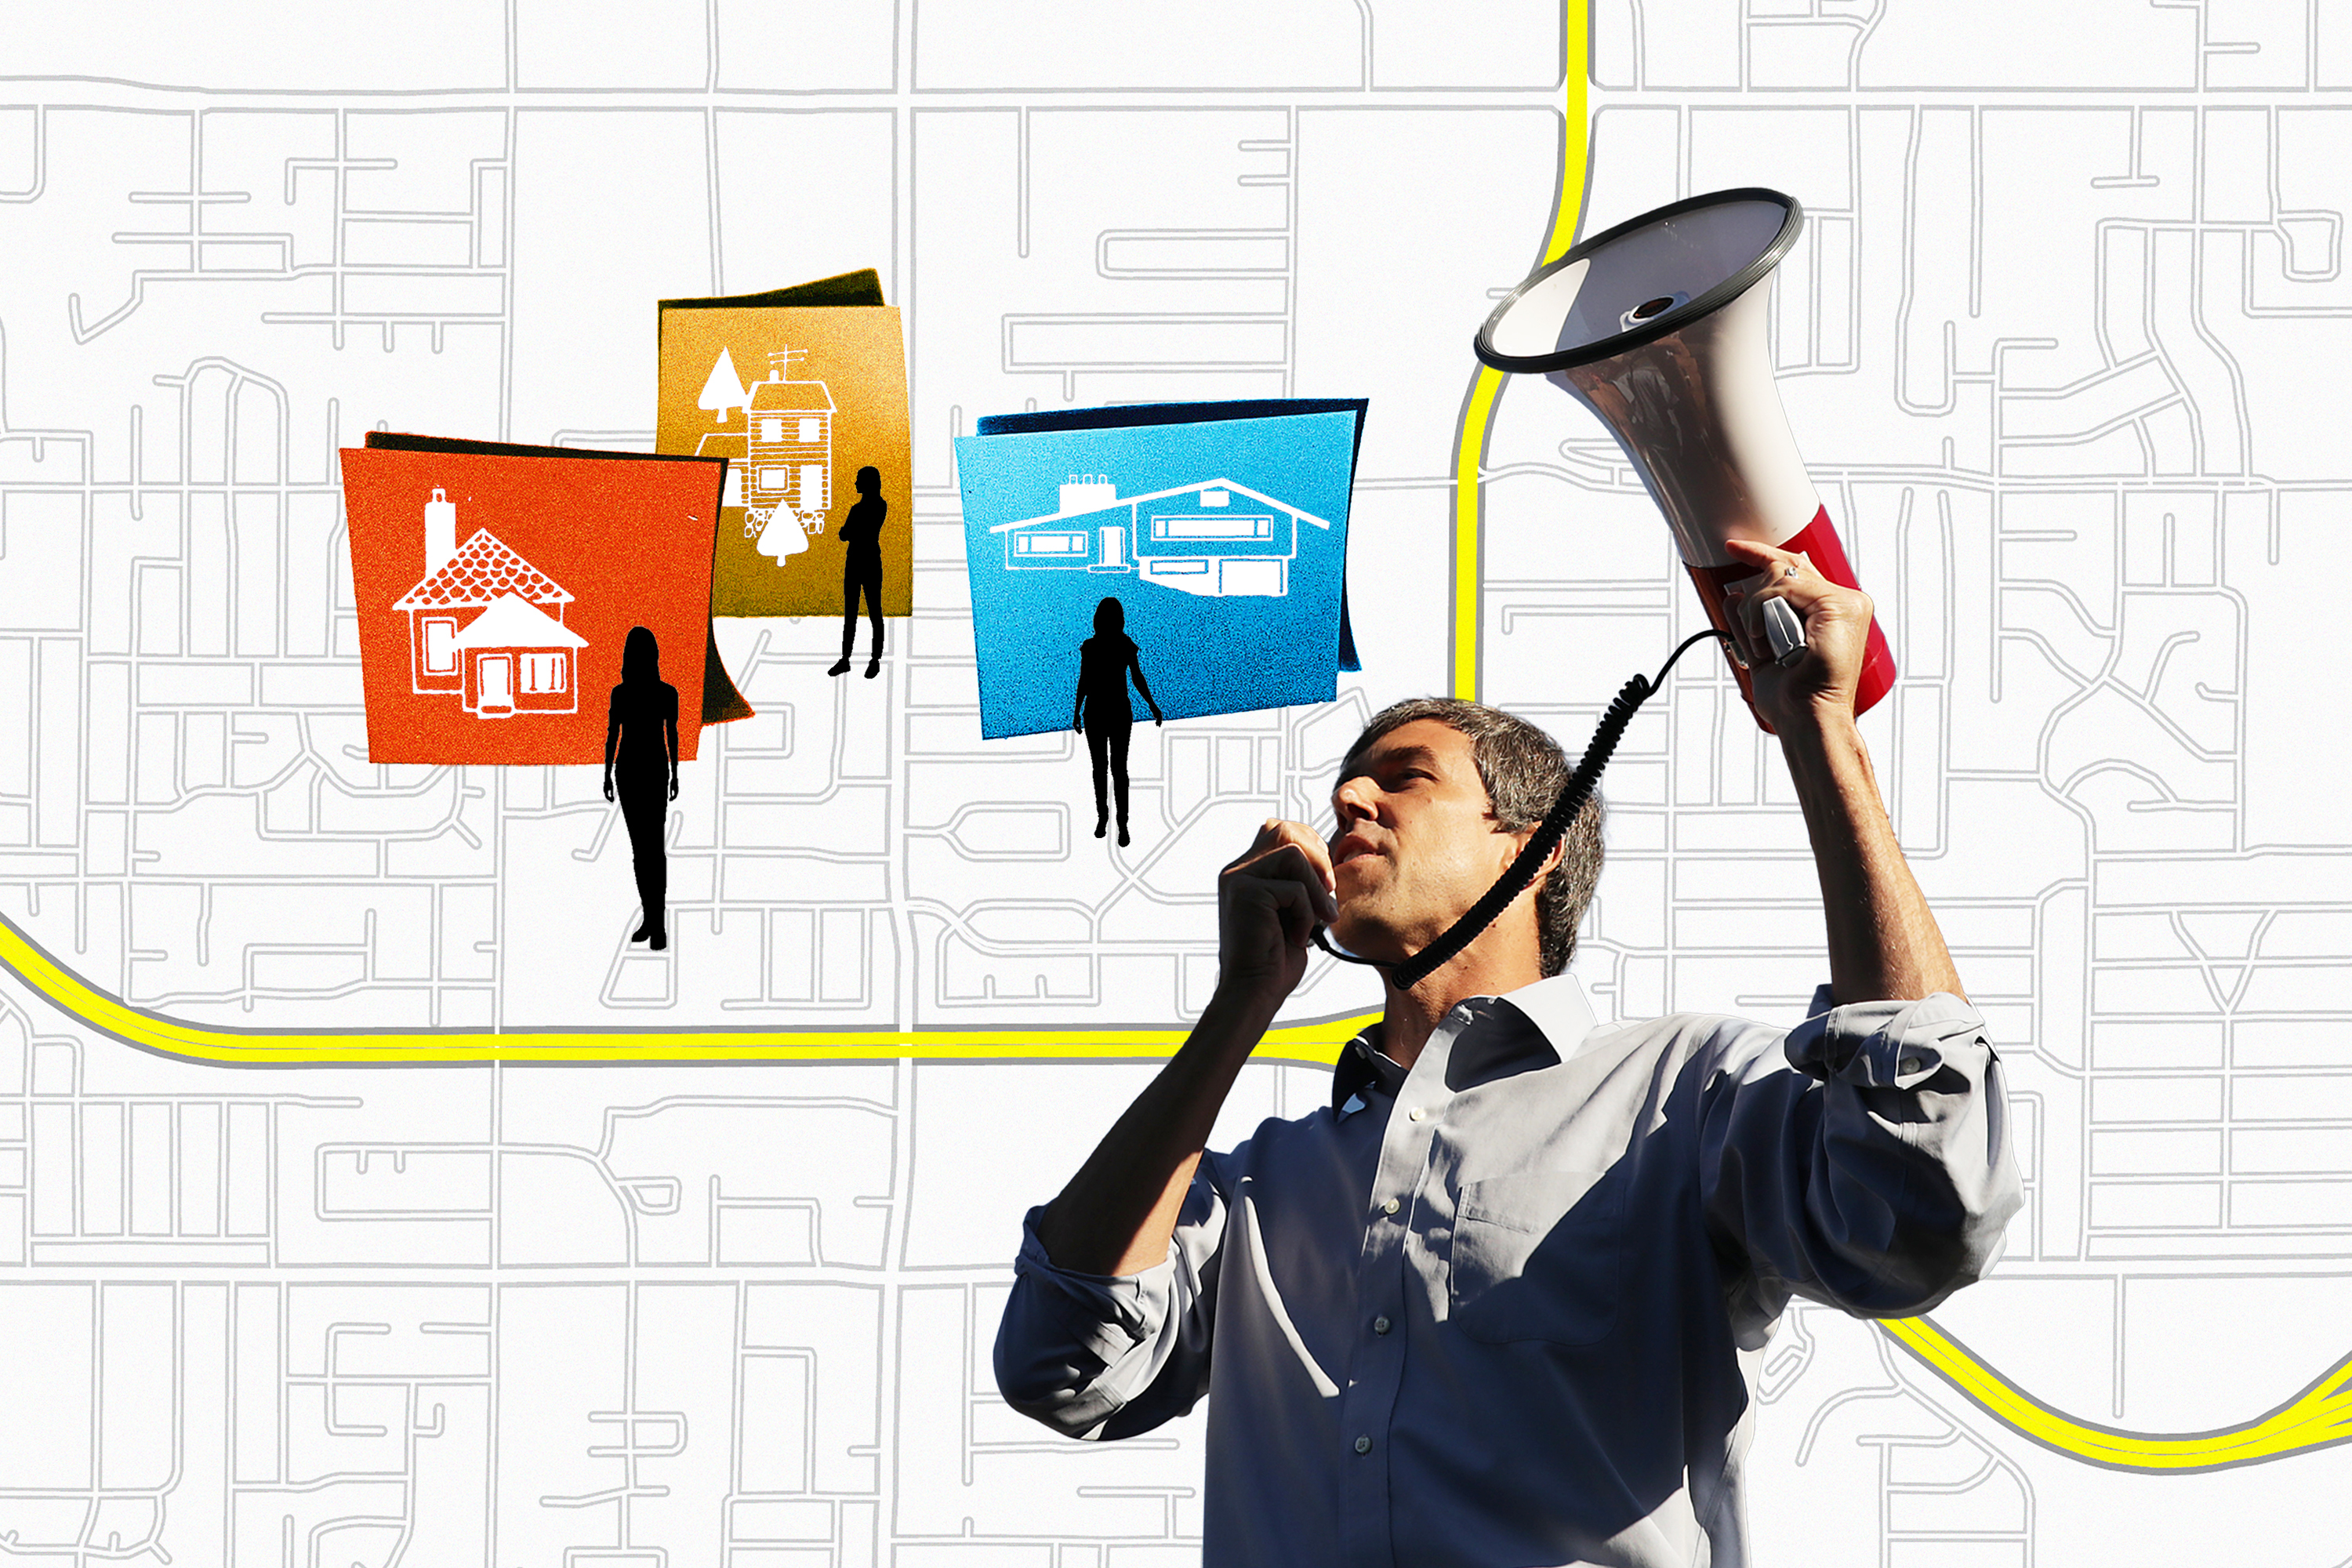 An illustration shows Beto O’Rourke with a megaphone, over a background of a city map and images of different-colored houses.